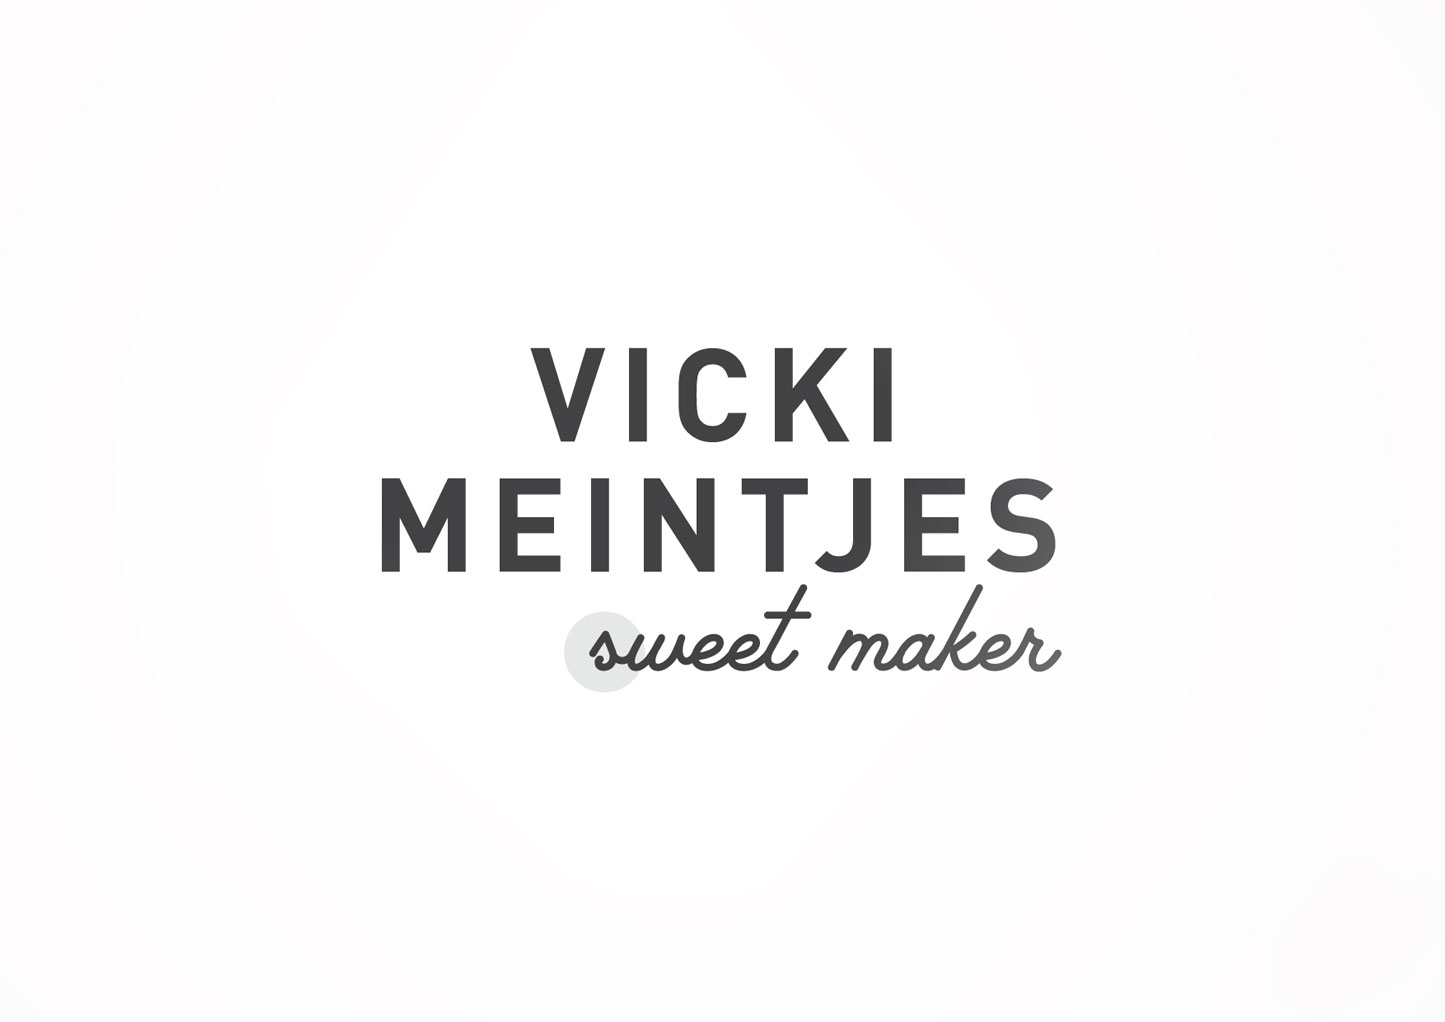 An alternate concept of the wordmark for Vick Meintjes Sweetmaker in a retro style, curvy typography.